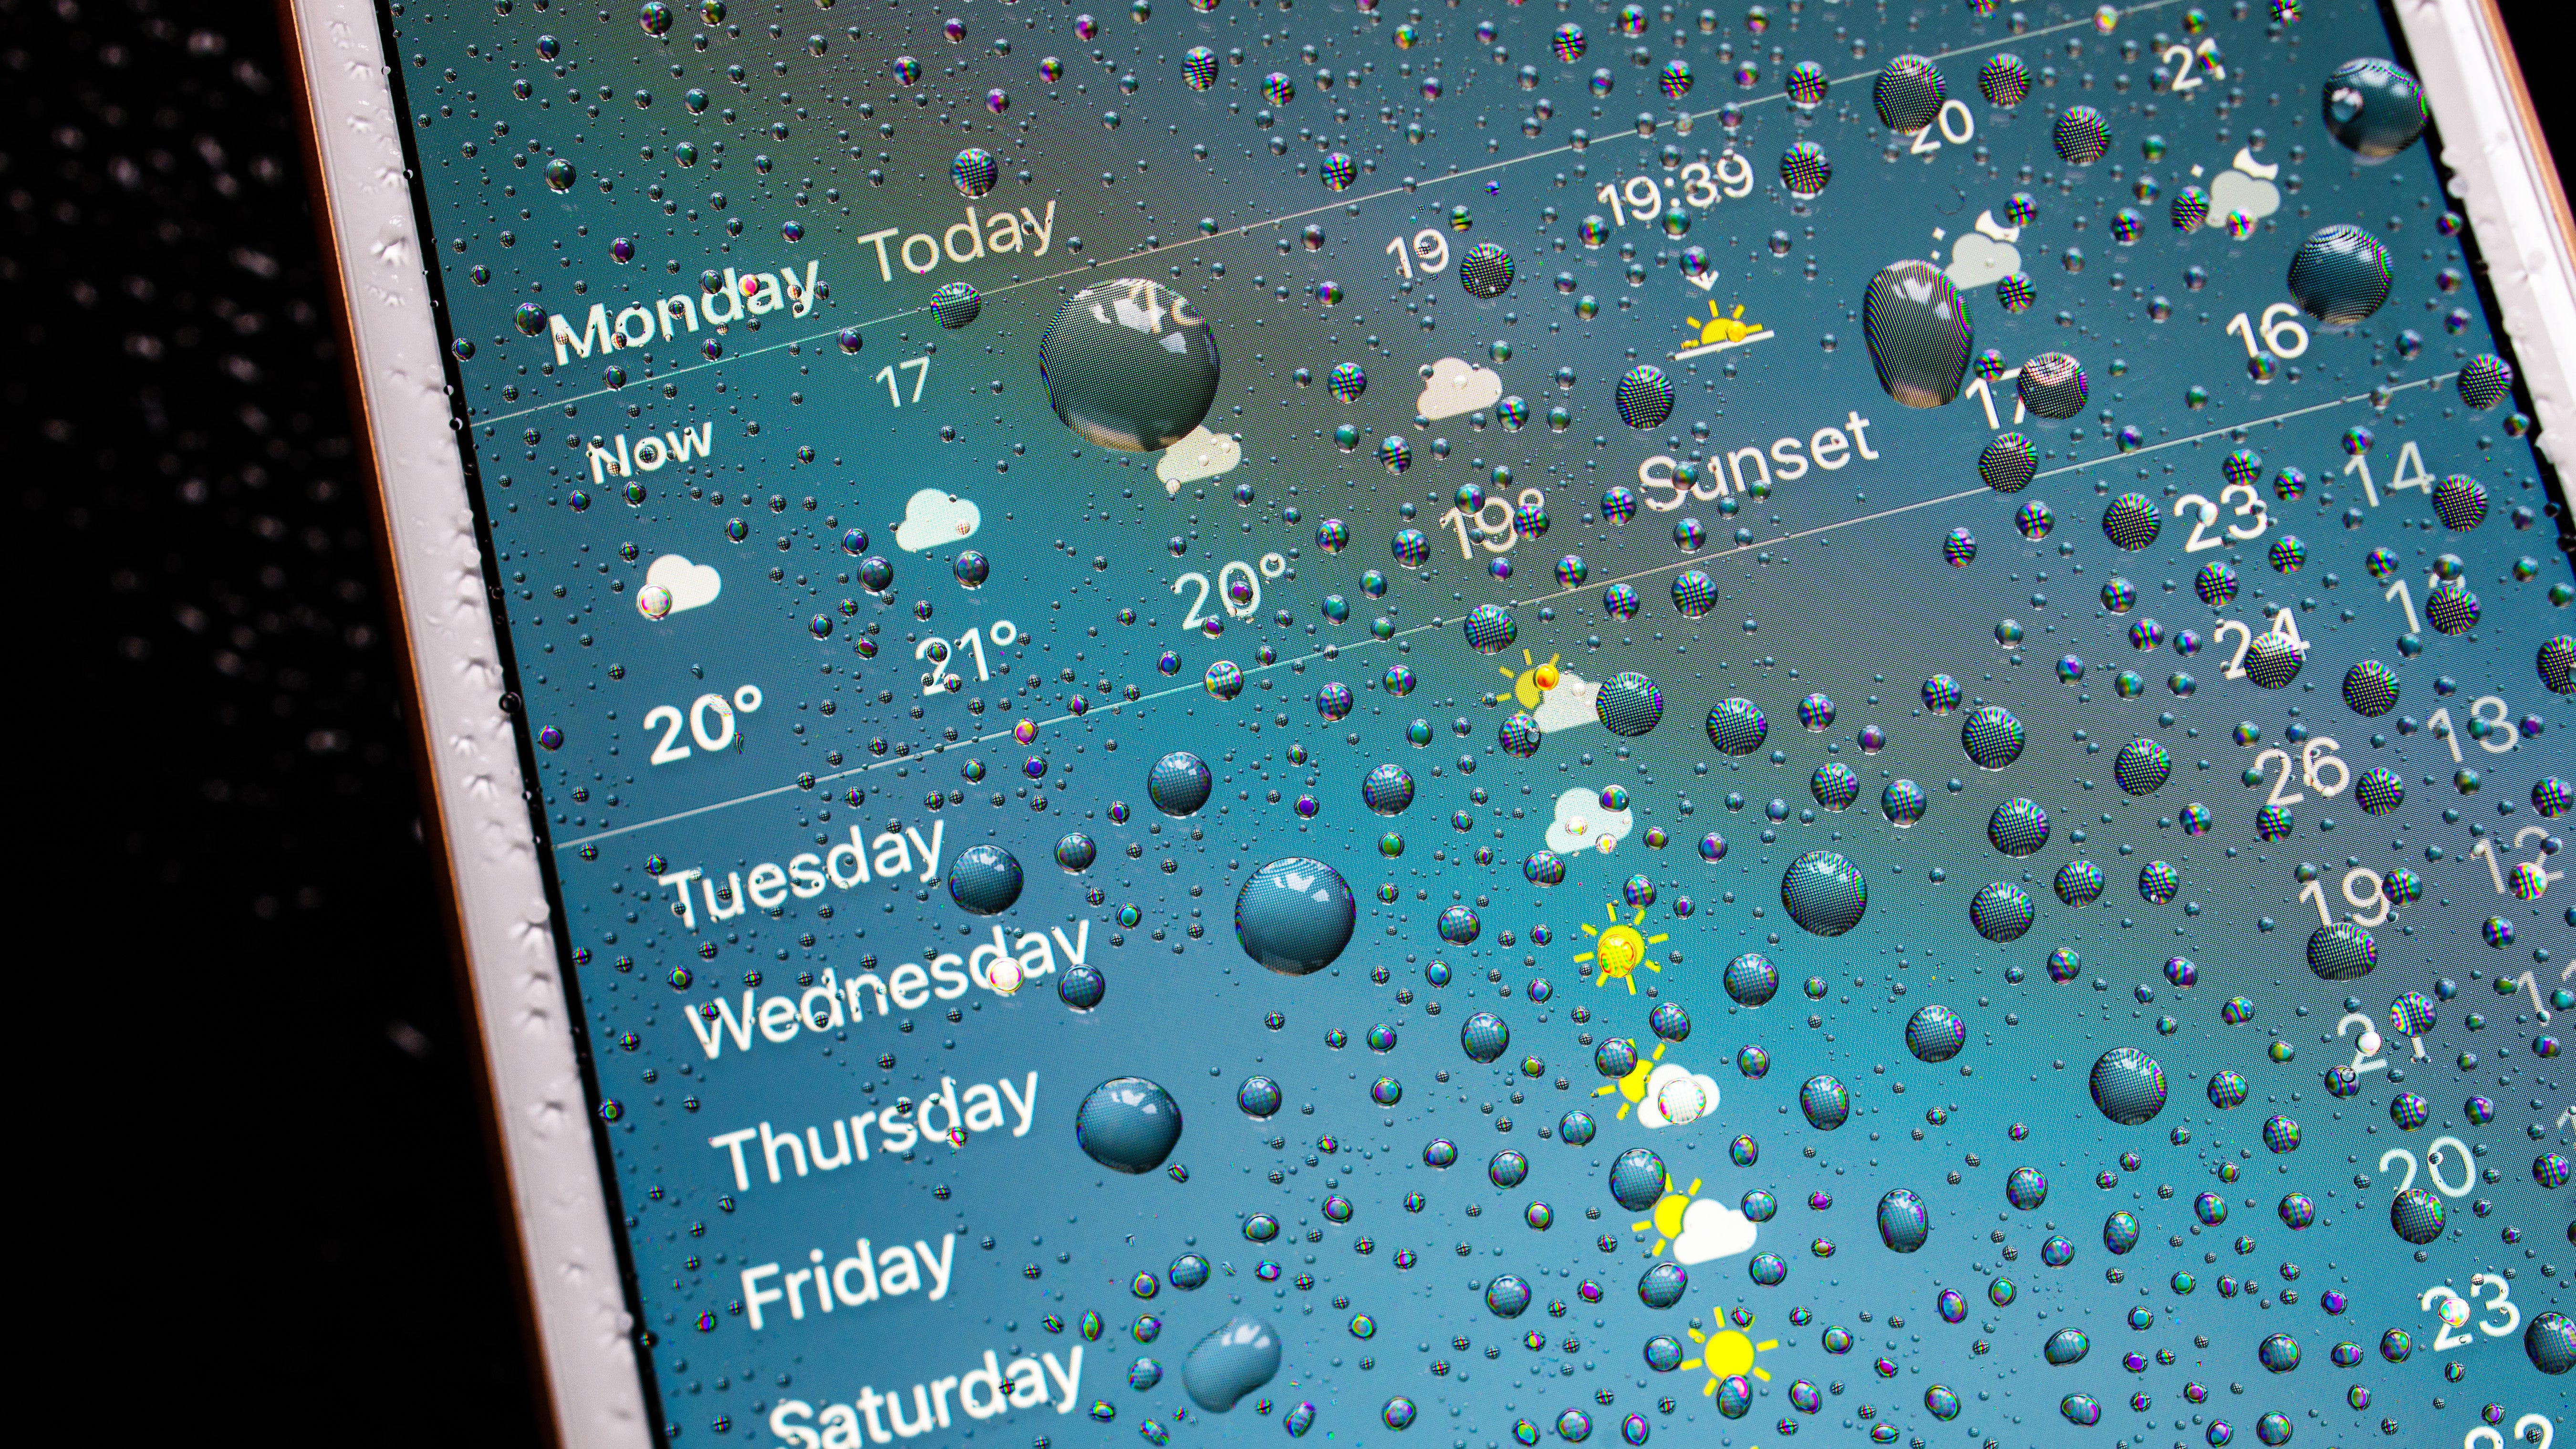 How To Predict The Weather When Your Apps Give You Conflicting Forecasts